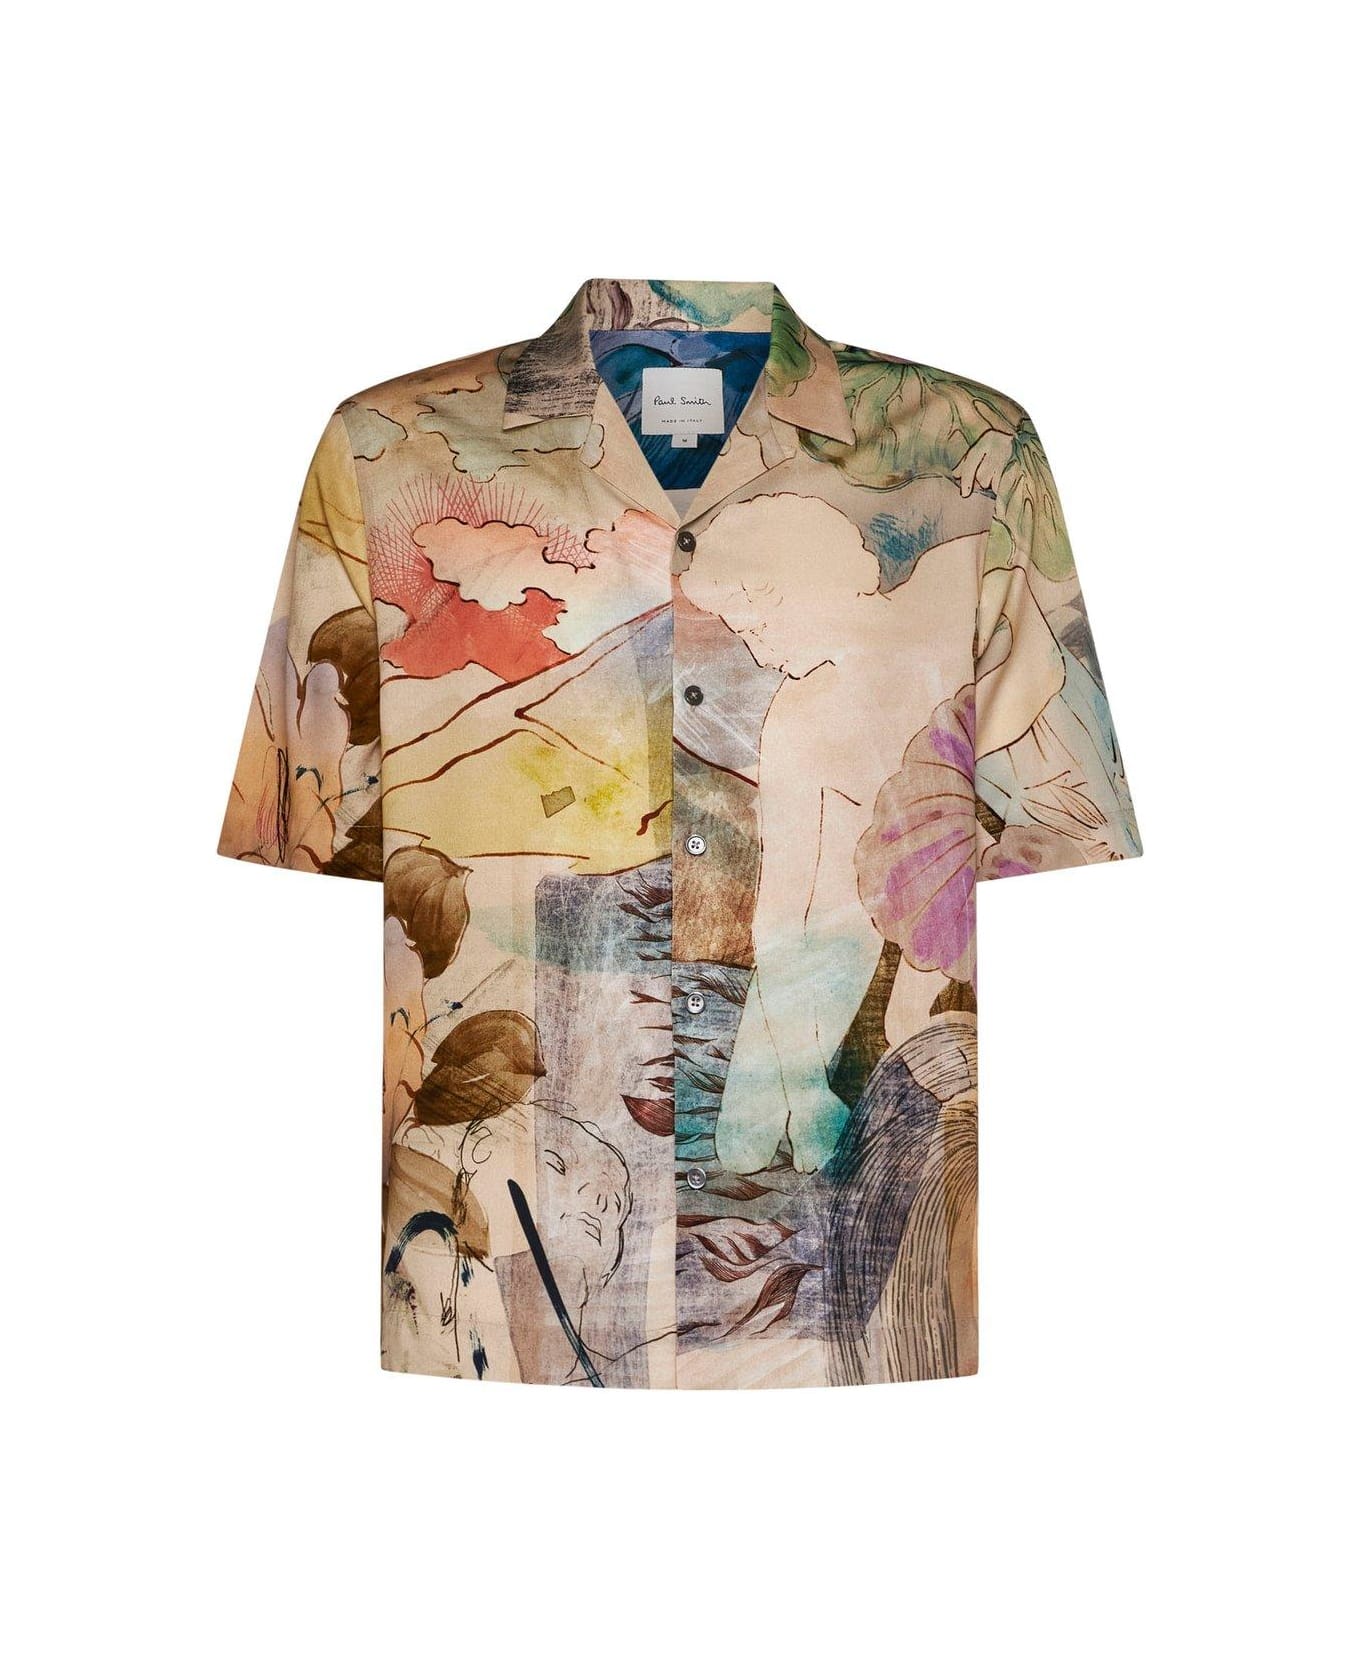 Paul Smith Graphic Printed Short-sleeved Shirt - BEIGE シャツ